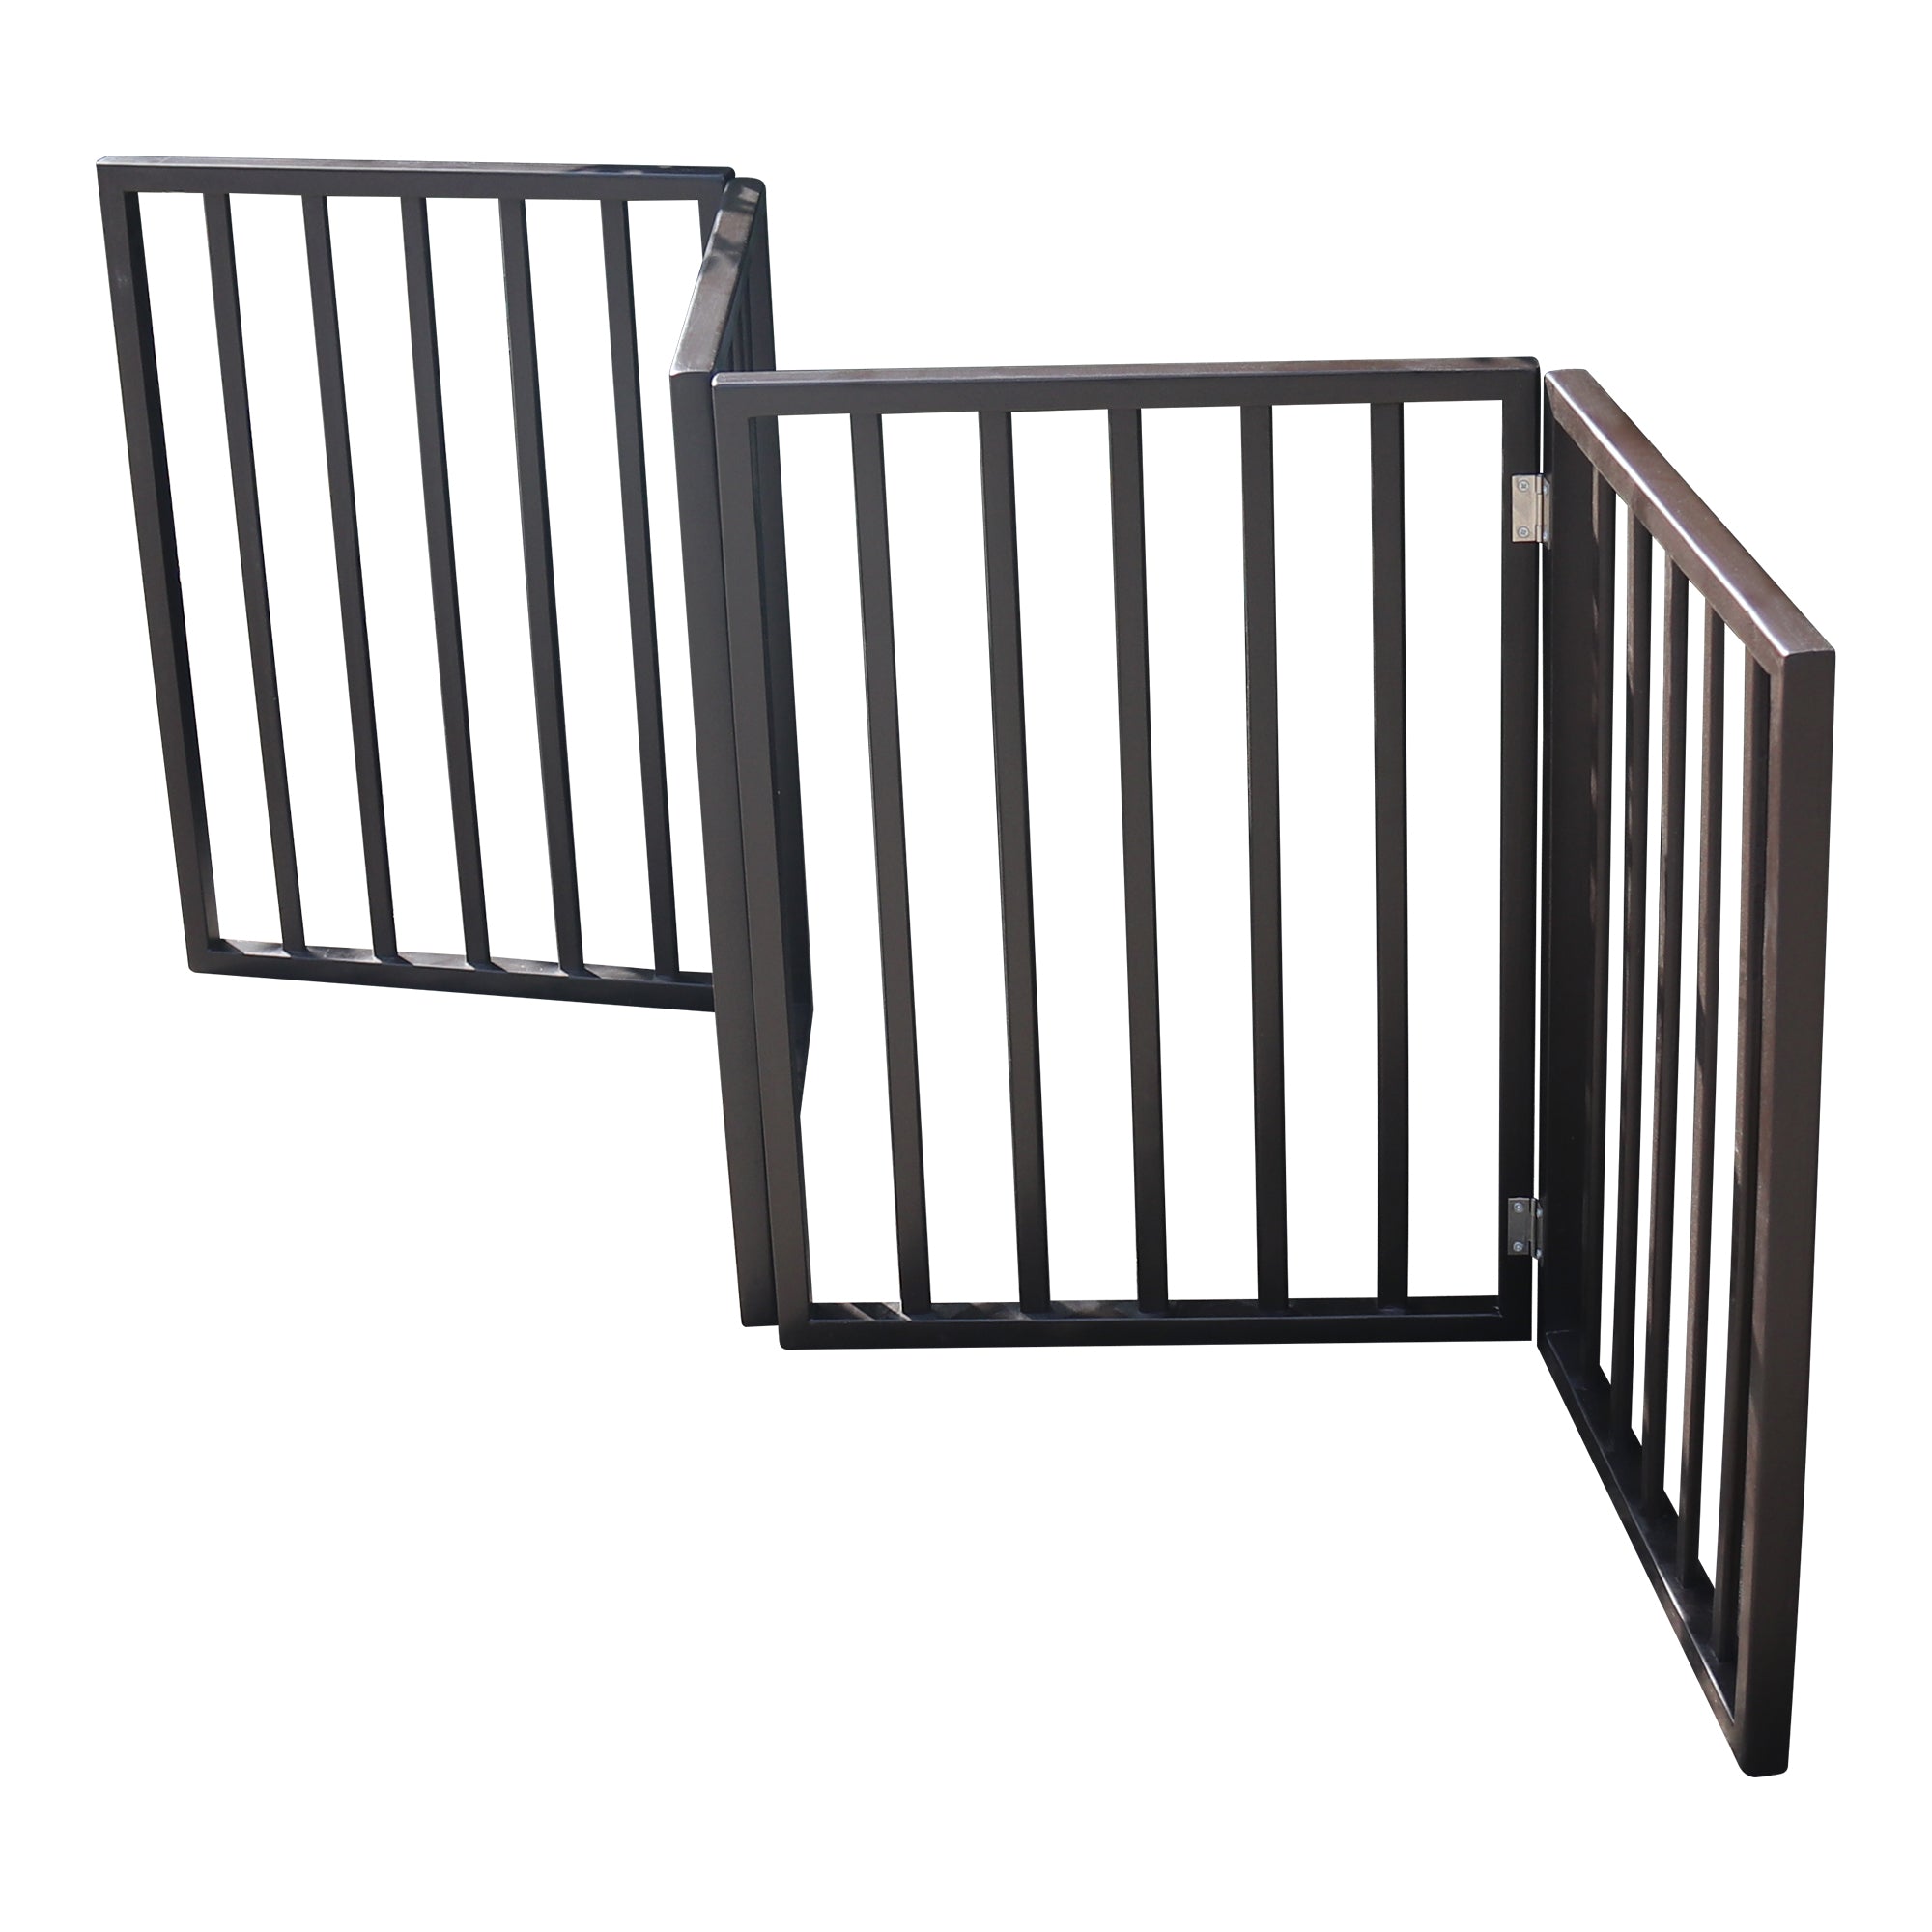 Pet Gate – Dog Gate for Doorways, Stairs or House – Freestanding, Folding，brown,Arc Wooden